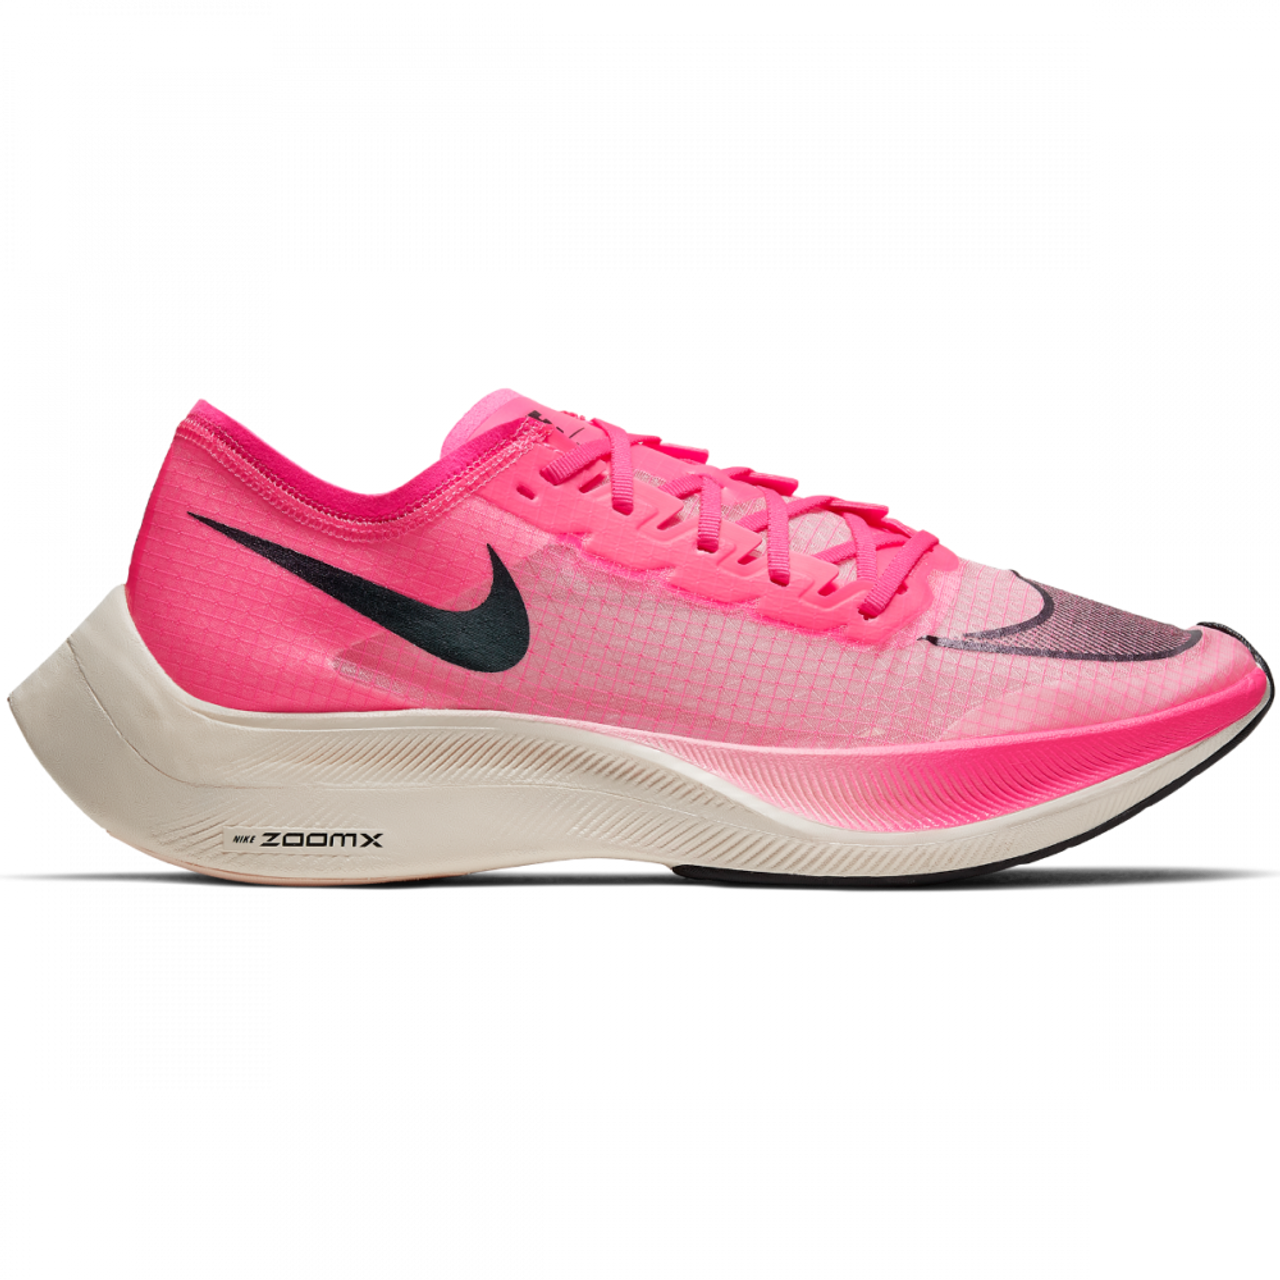 nike zoomx vaporfly next for sale